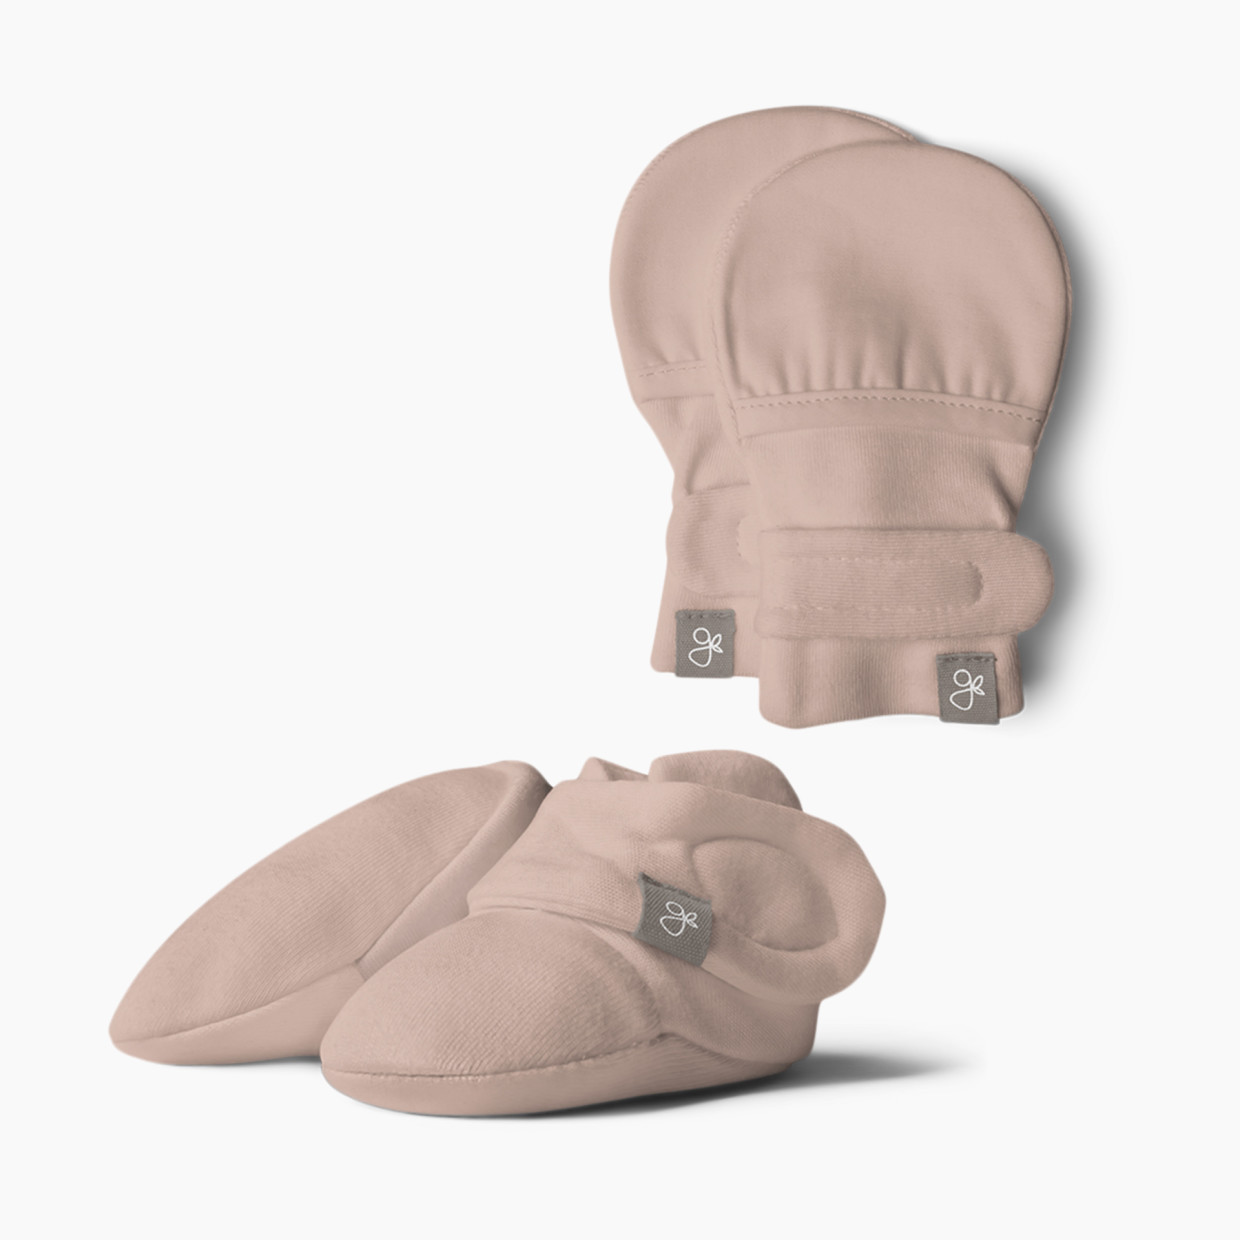 Goumi Kids Stay on Baby Mitts + Boots Bundle - Rose, 0-3 Months.